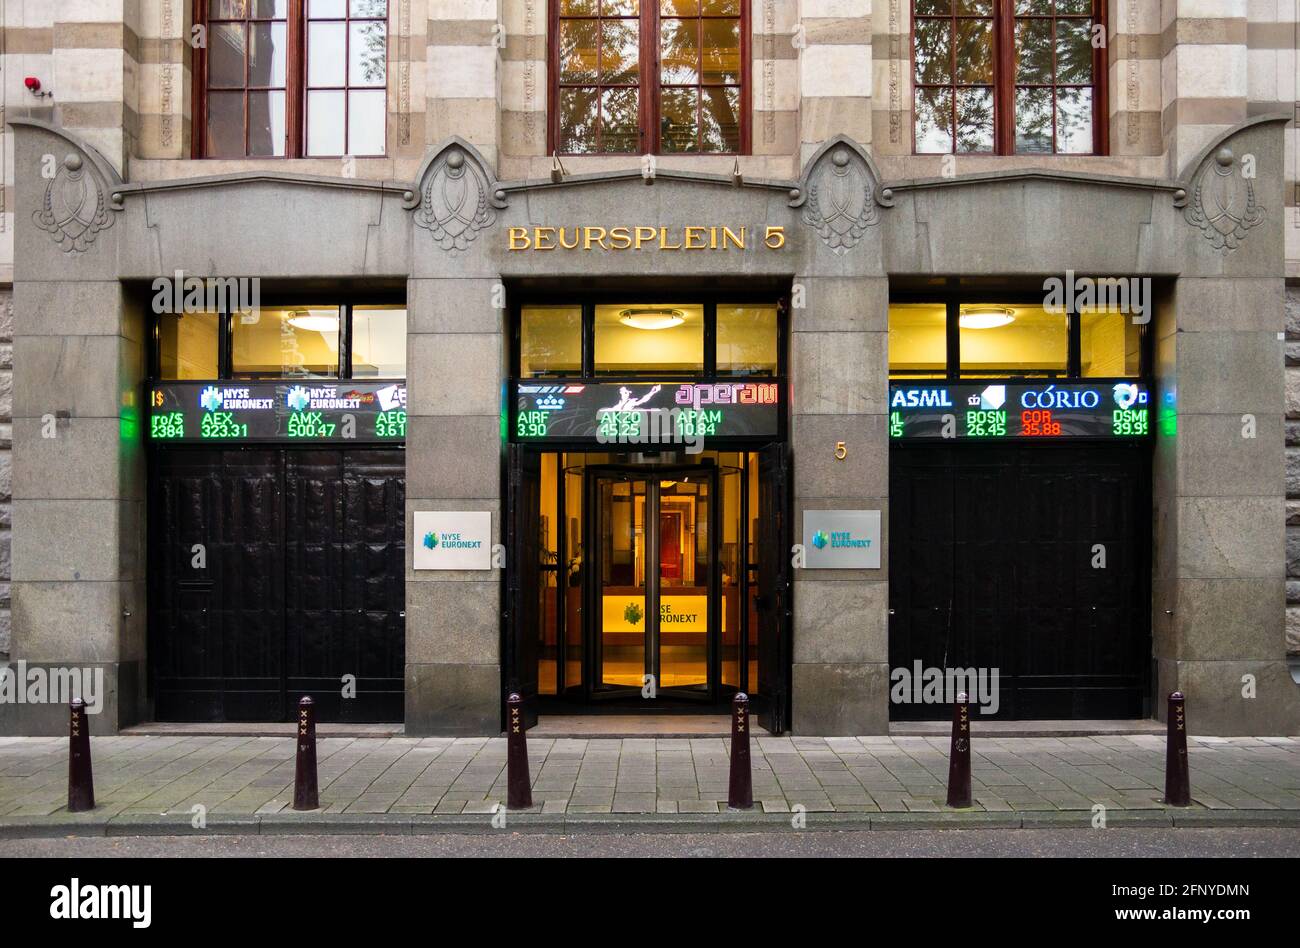 Euronext Amsterdam stock exchange entrance at Beursplein 5. The Netherlands - July 27, 2012 Stock Photo